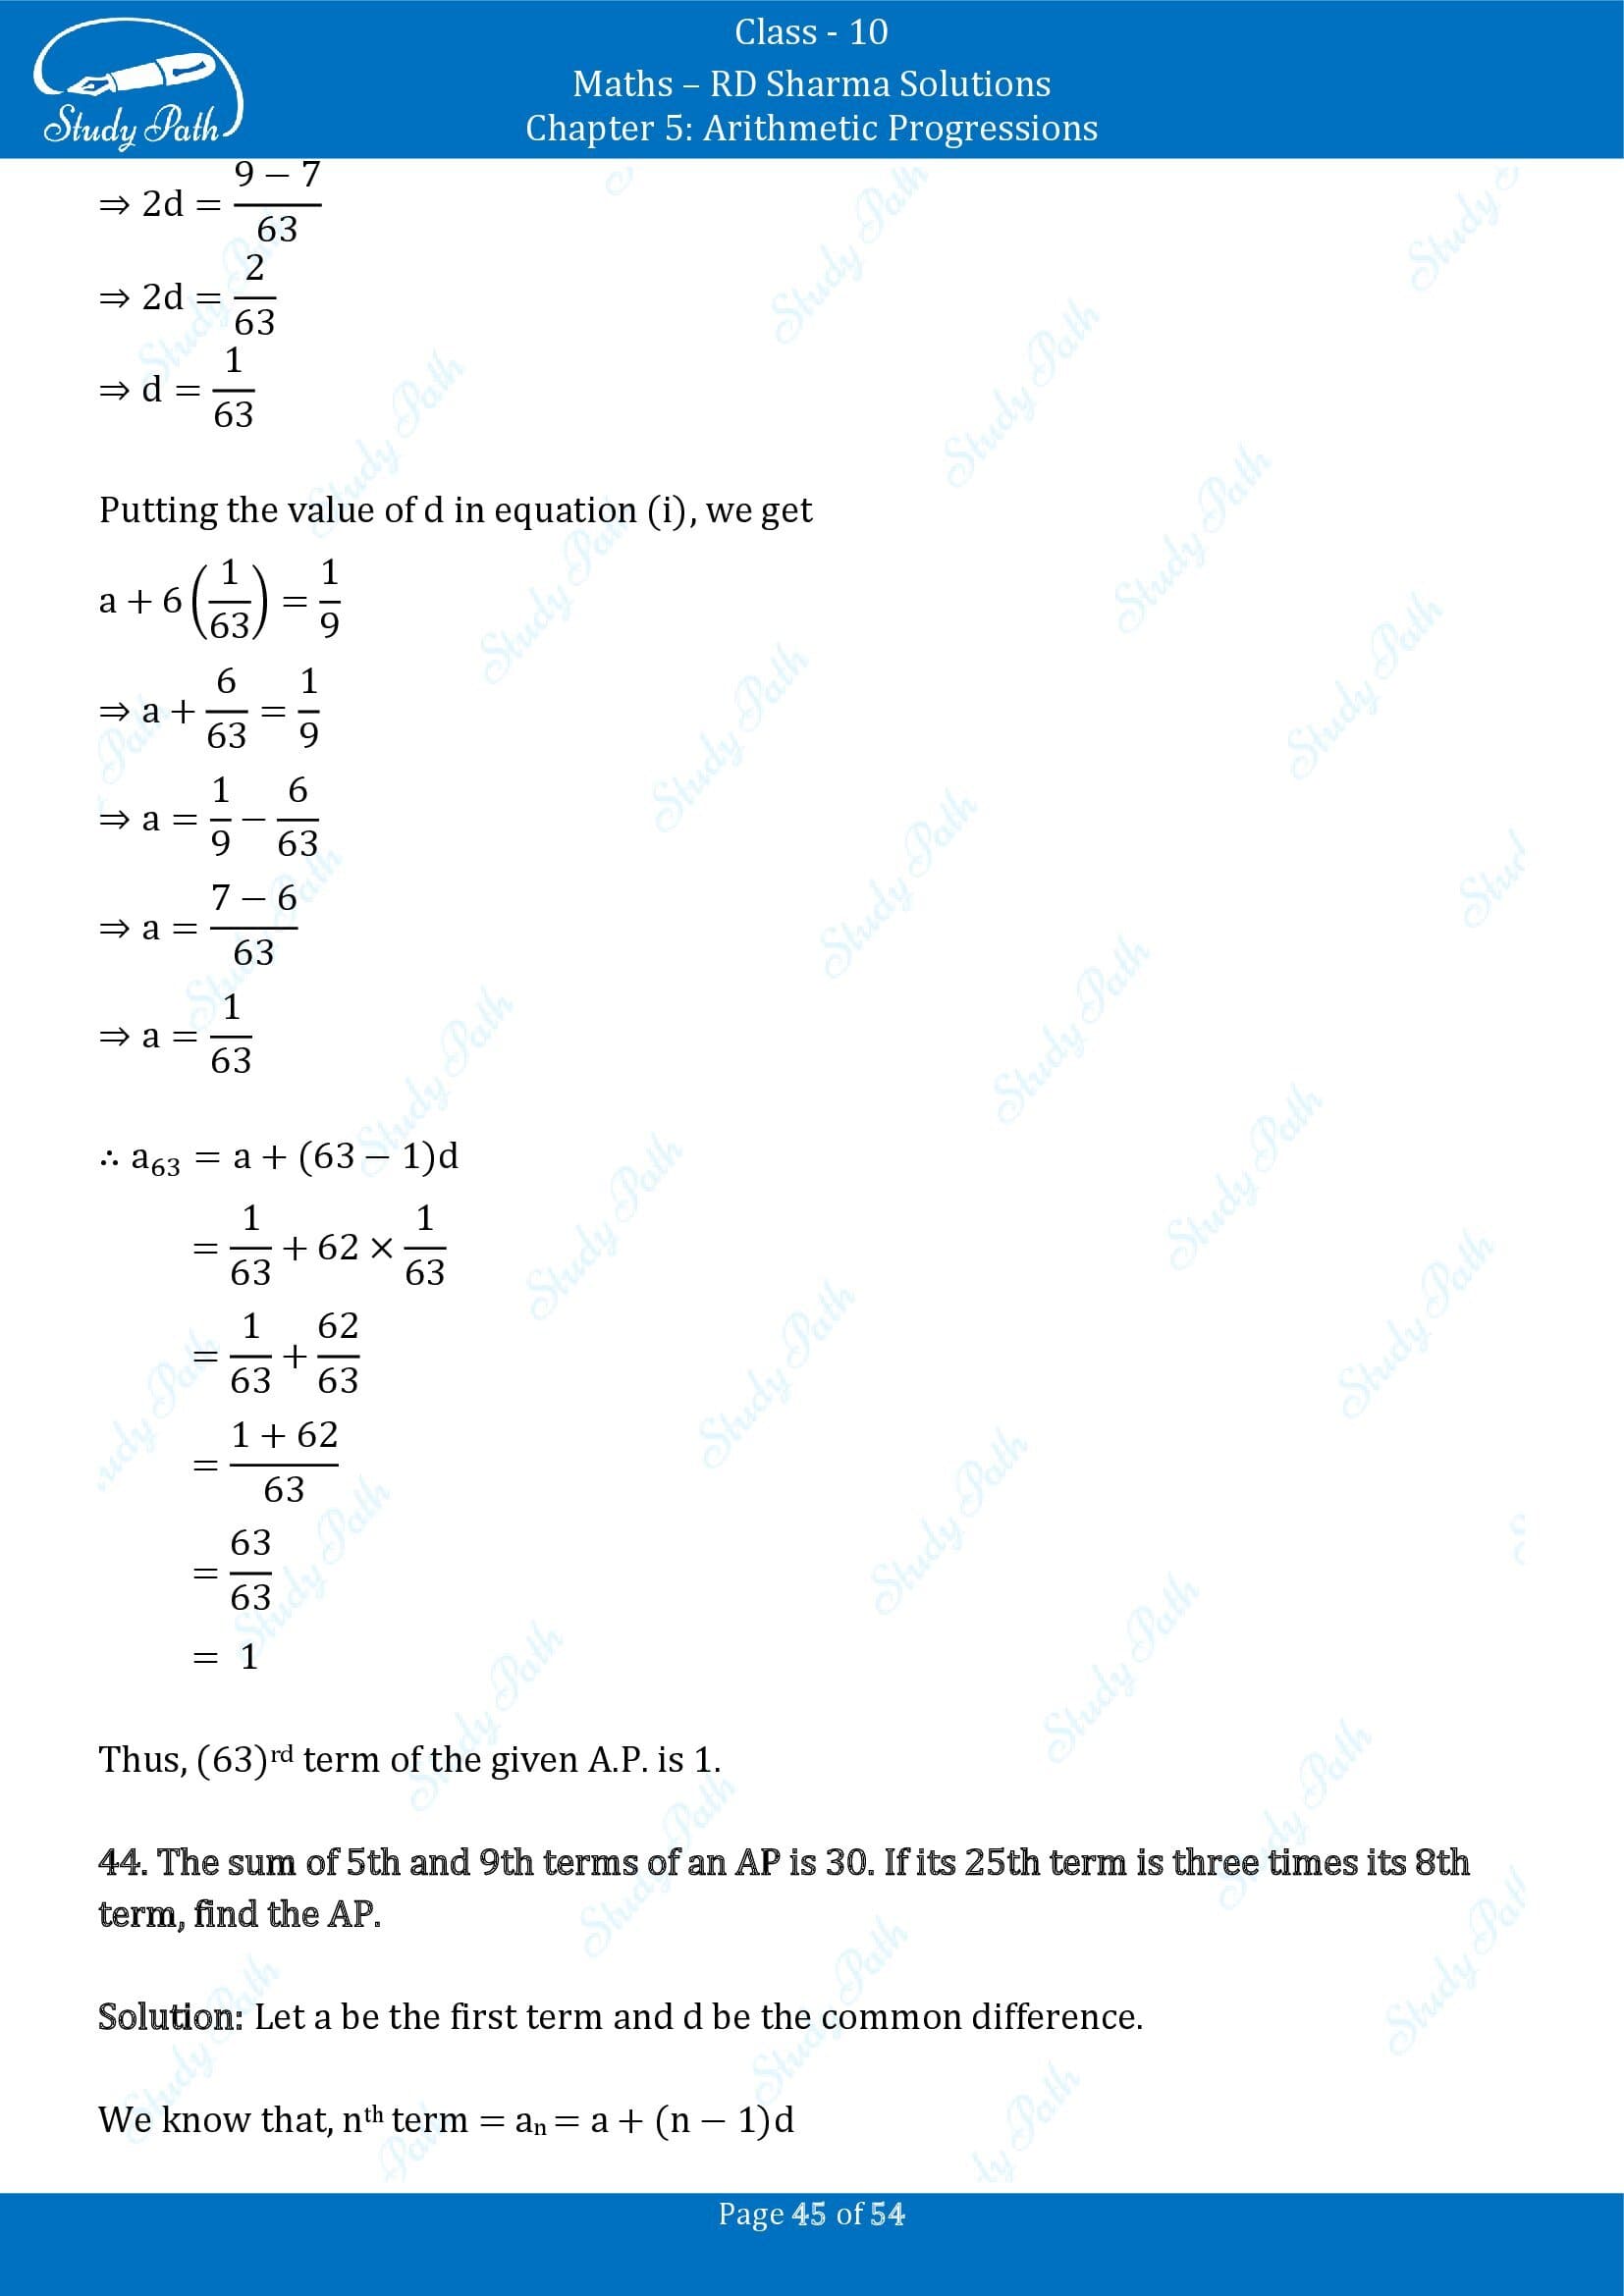 RD Sharma Solutions Class 10 Chapter 5 Arithmetic Progressions Exercise 5.4 00045